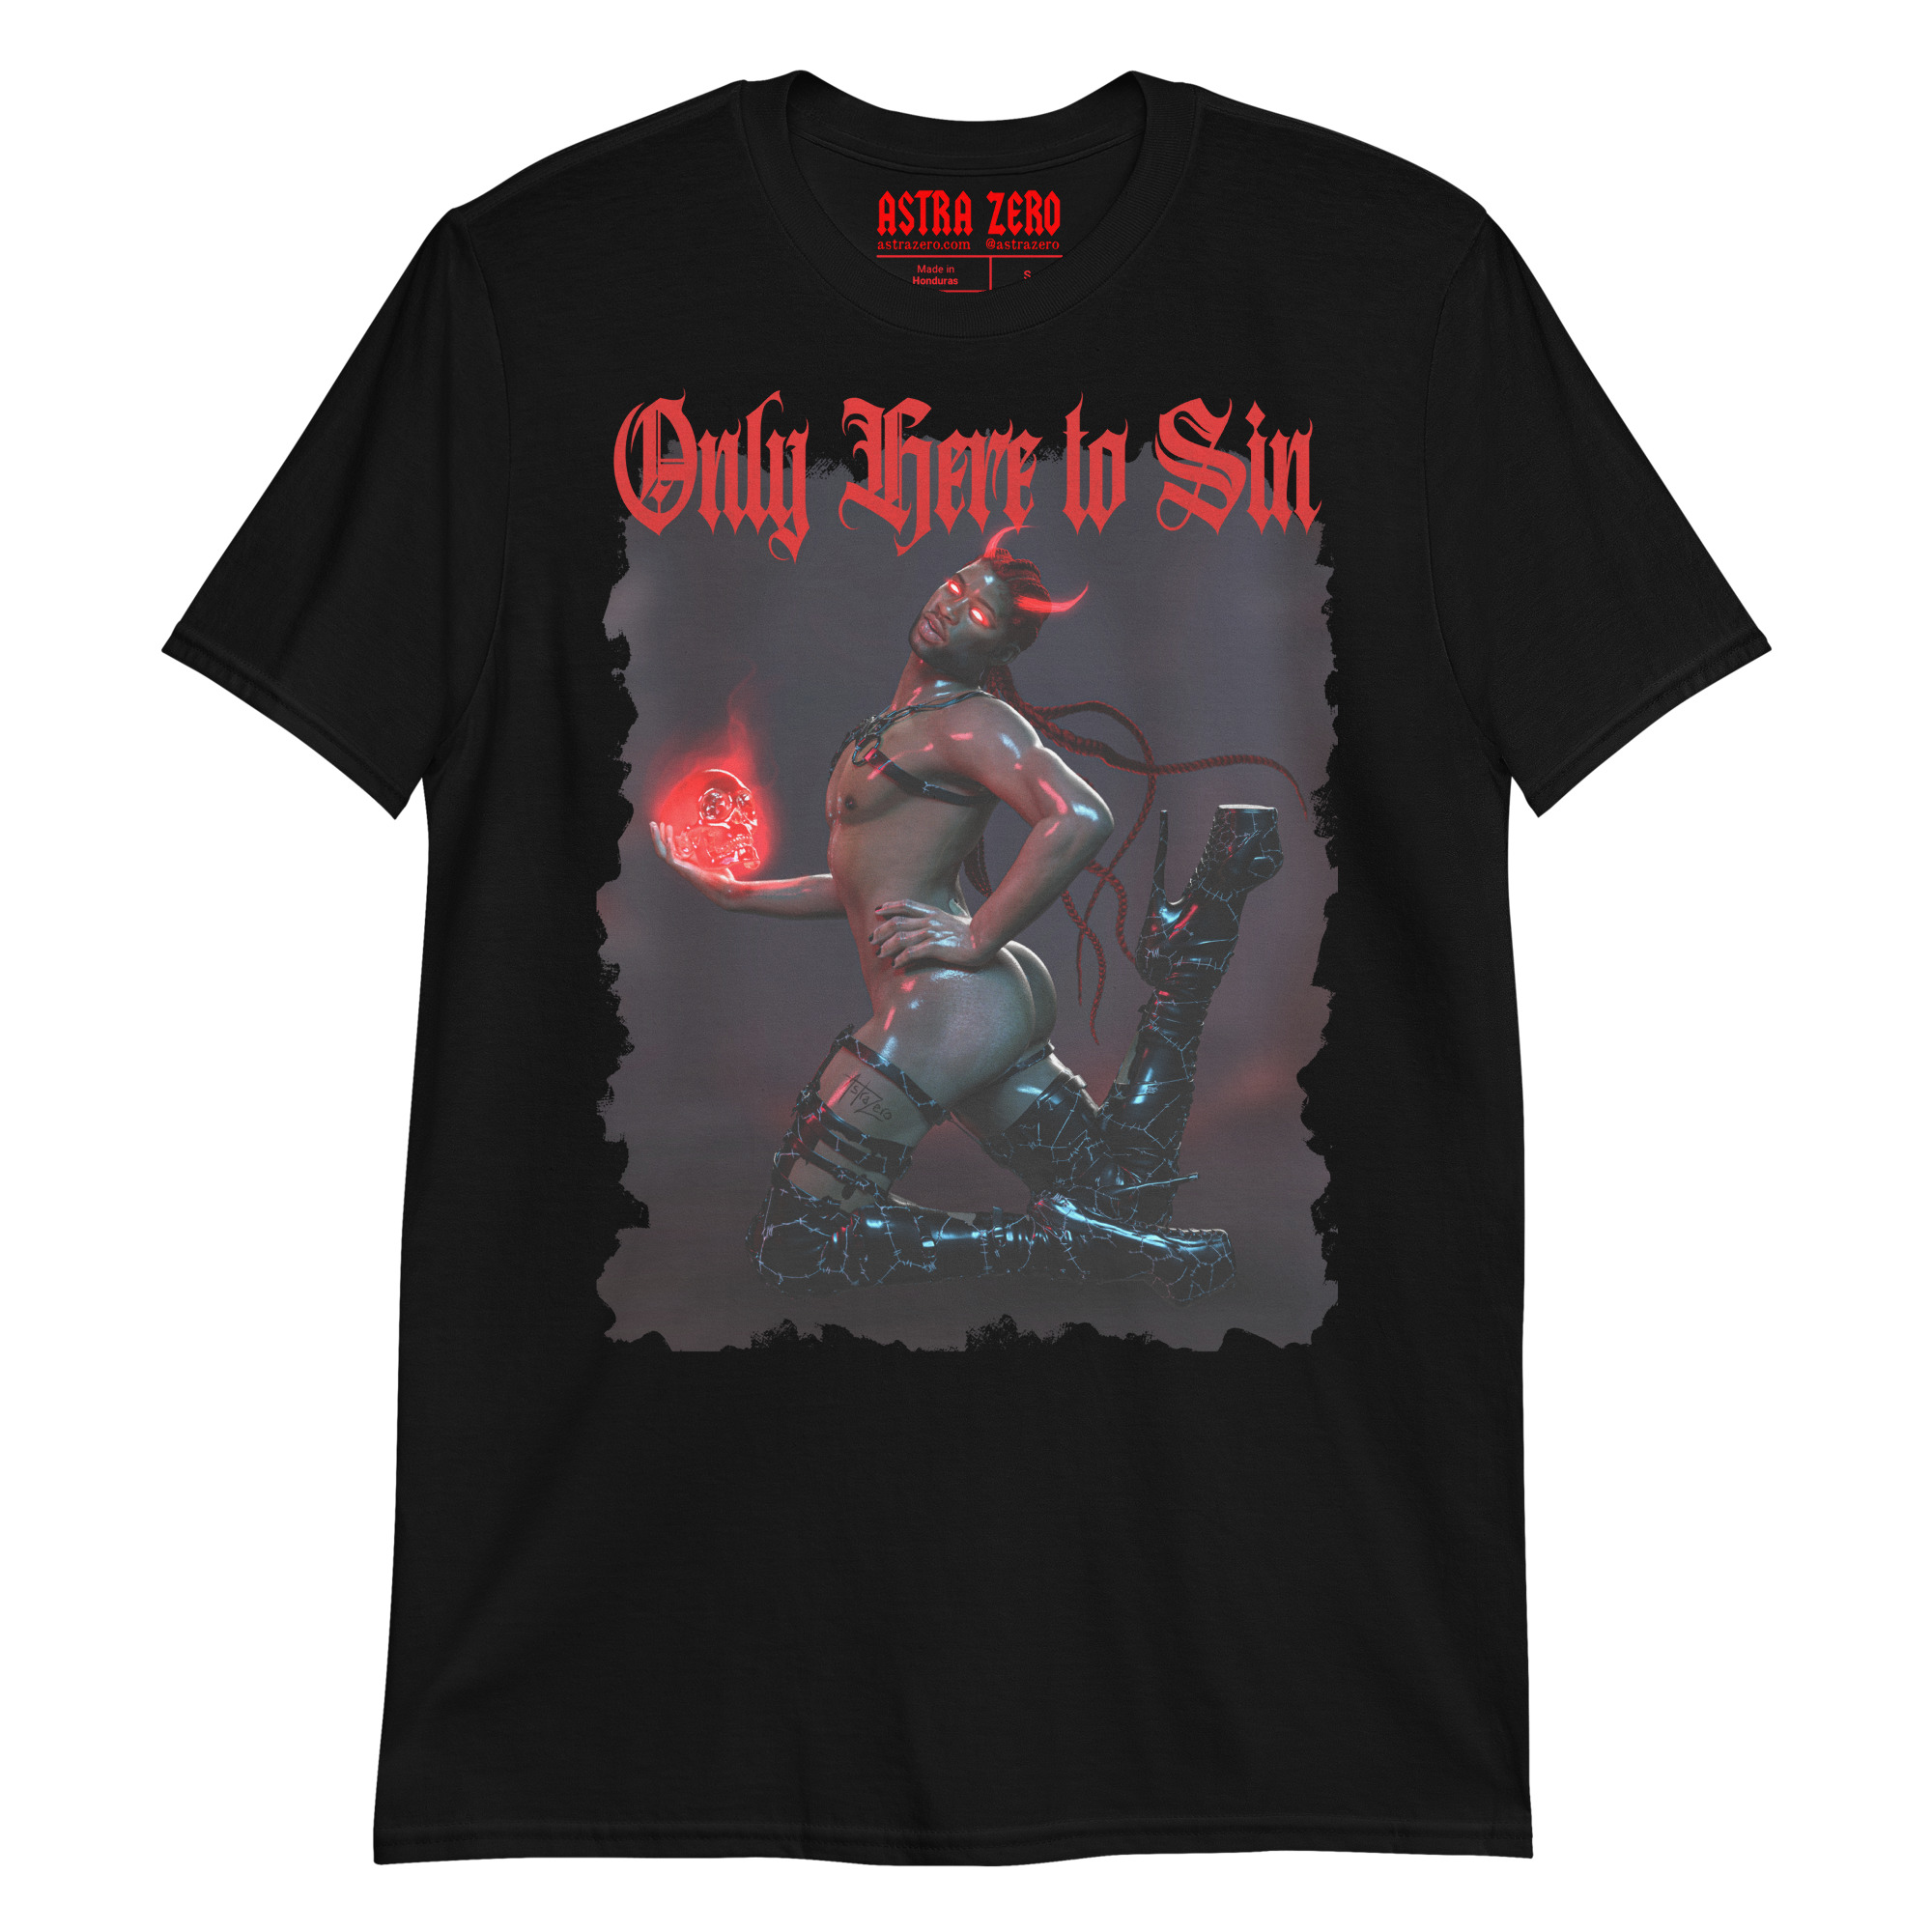 Featured image for “Only Here to Sin - Short-Sleeve Unisex T-Shirt”